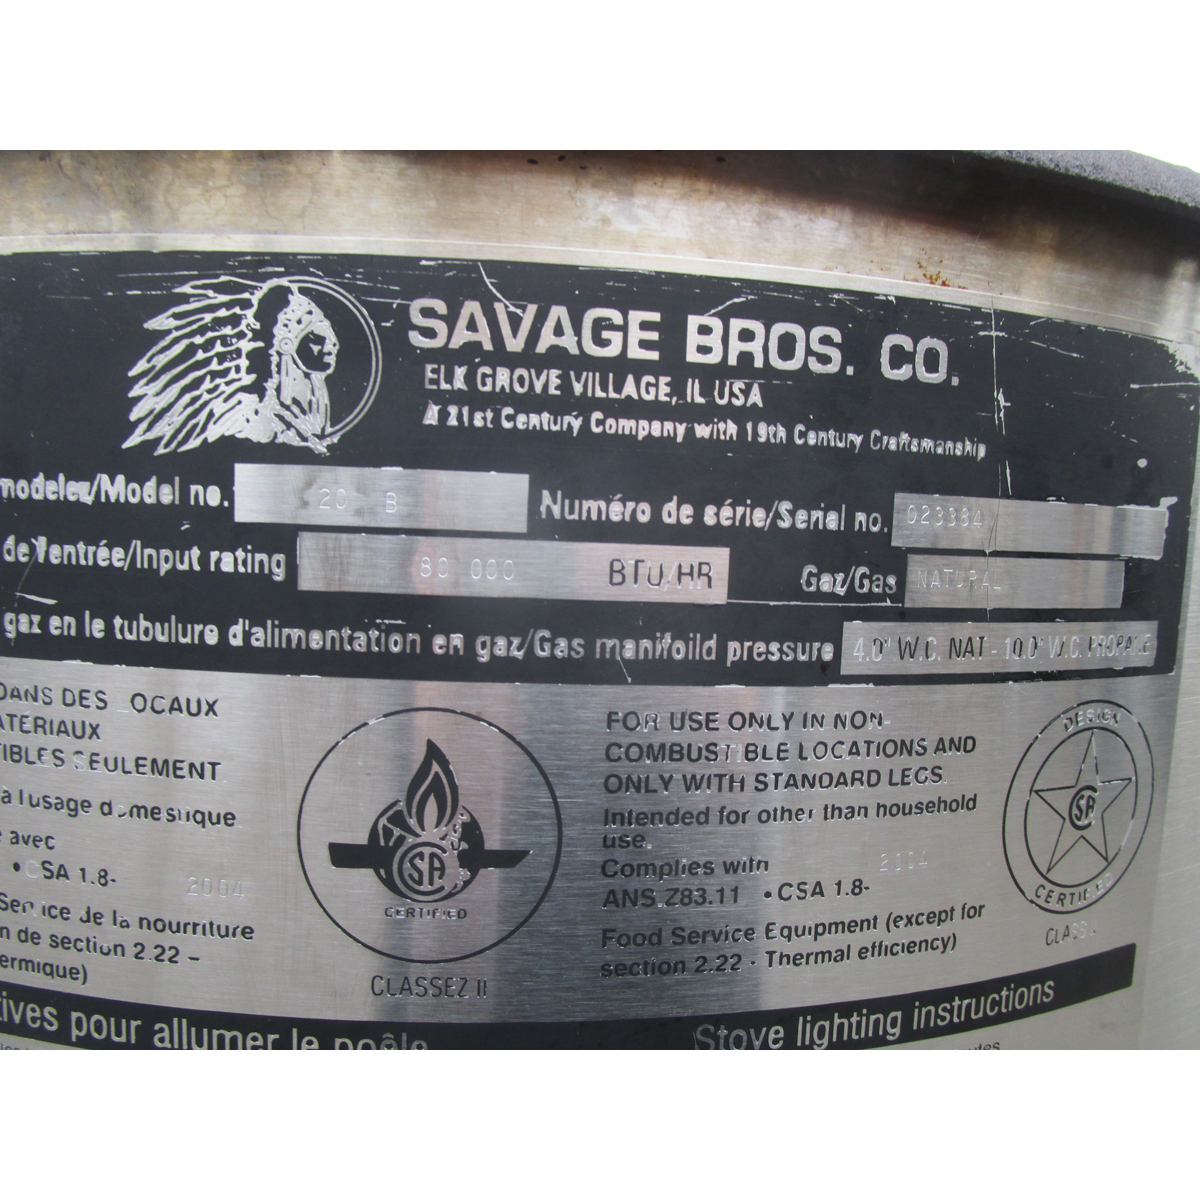 Savage Bros. #20 Candy Stove Model 20B, Very Good Condition image 4